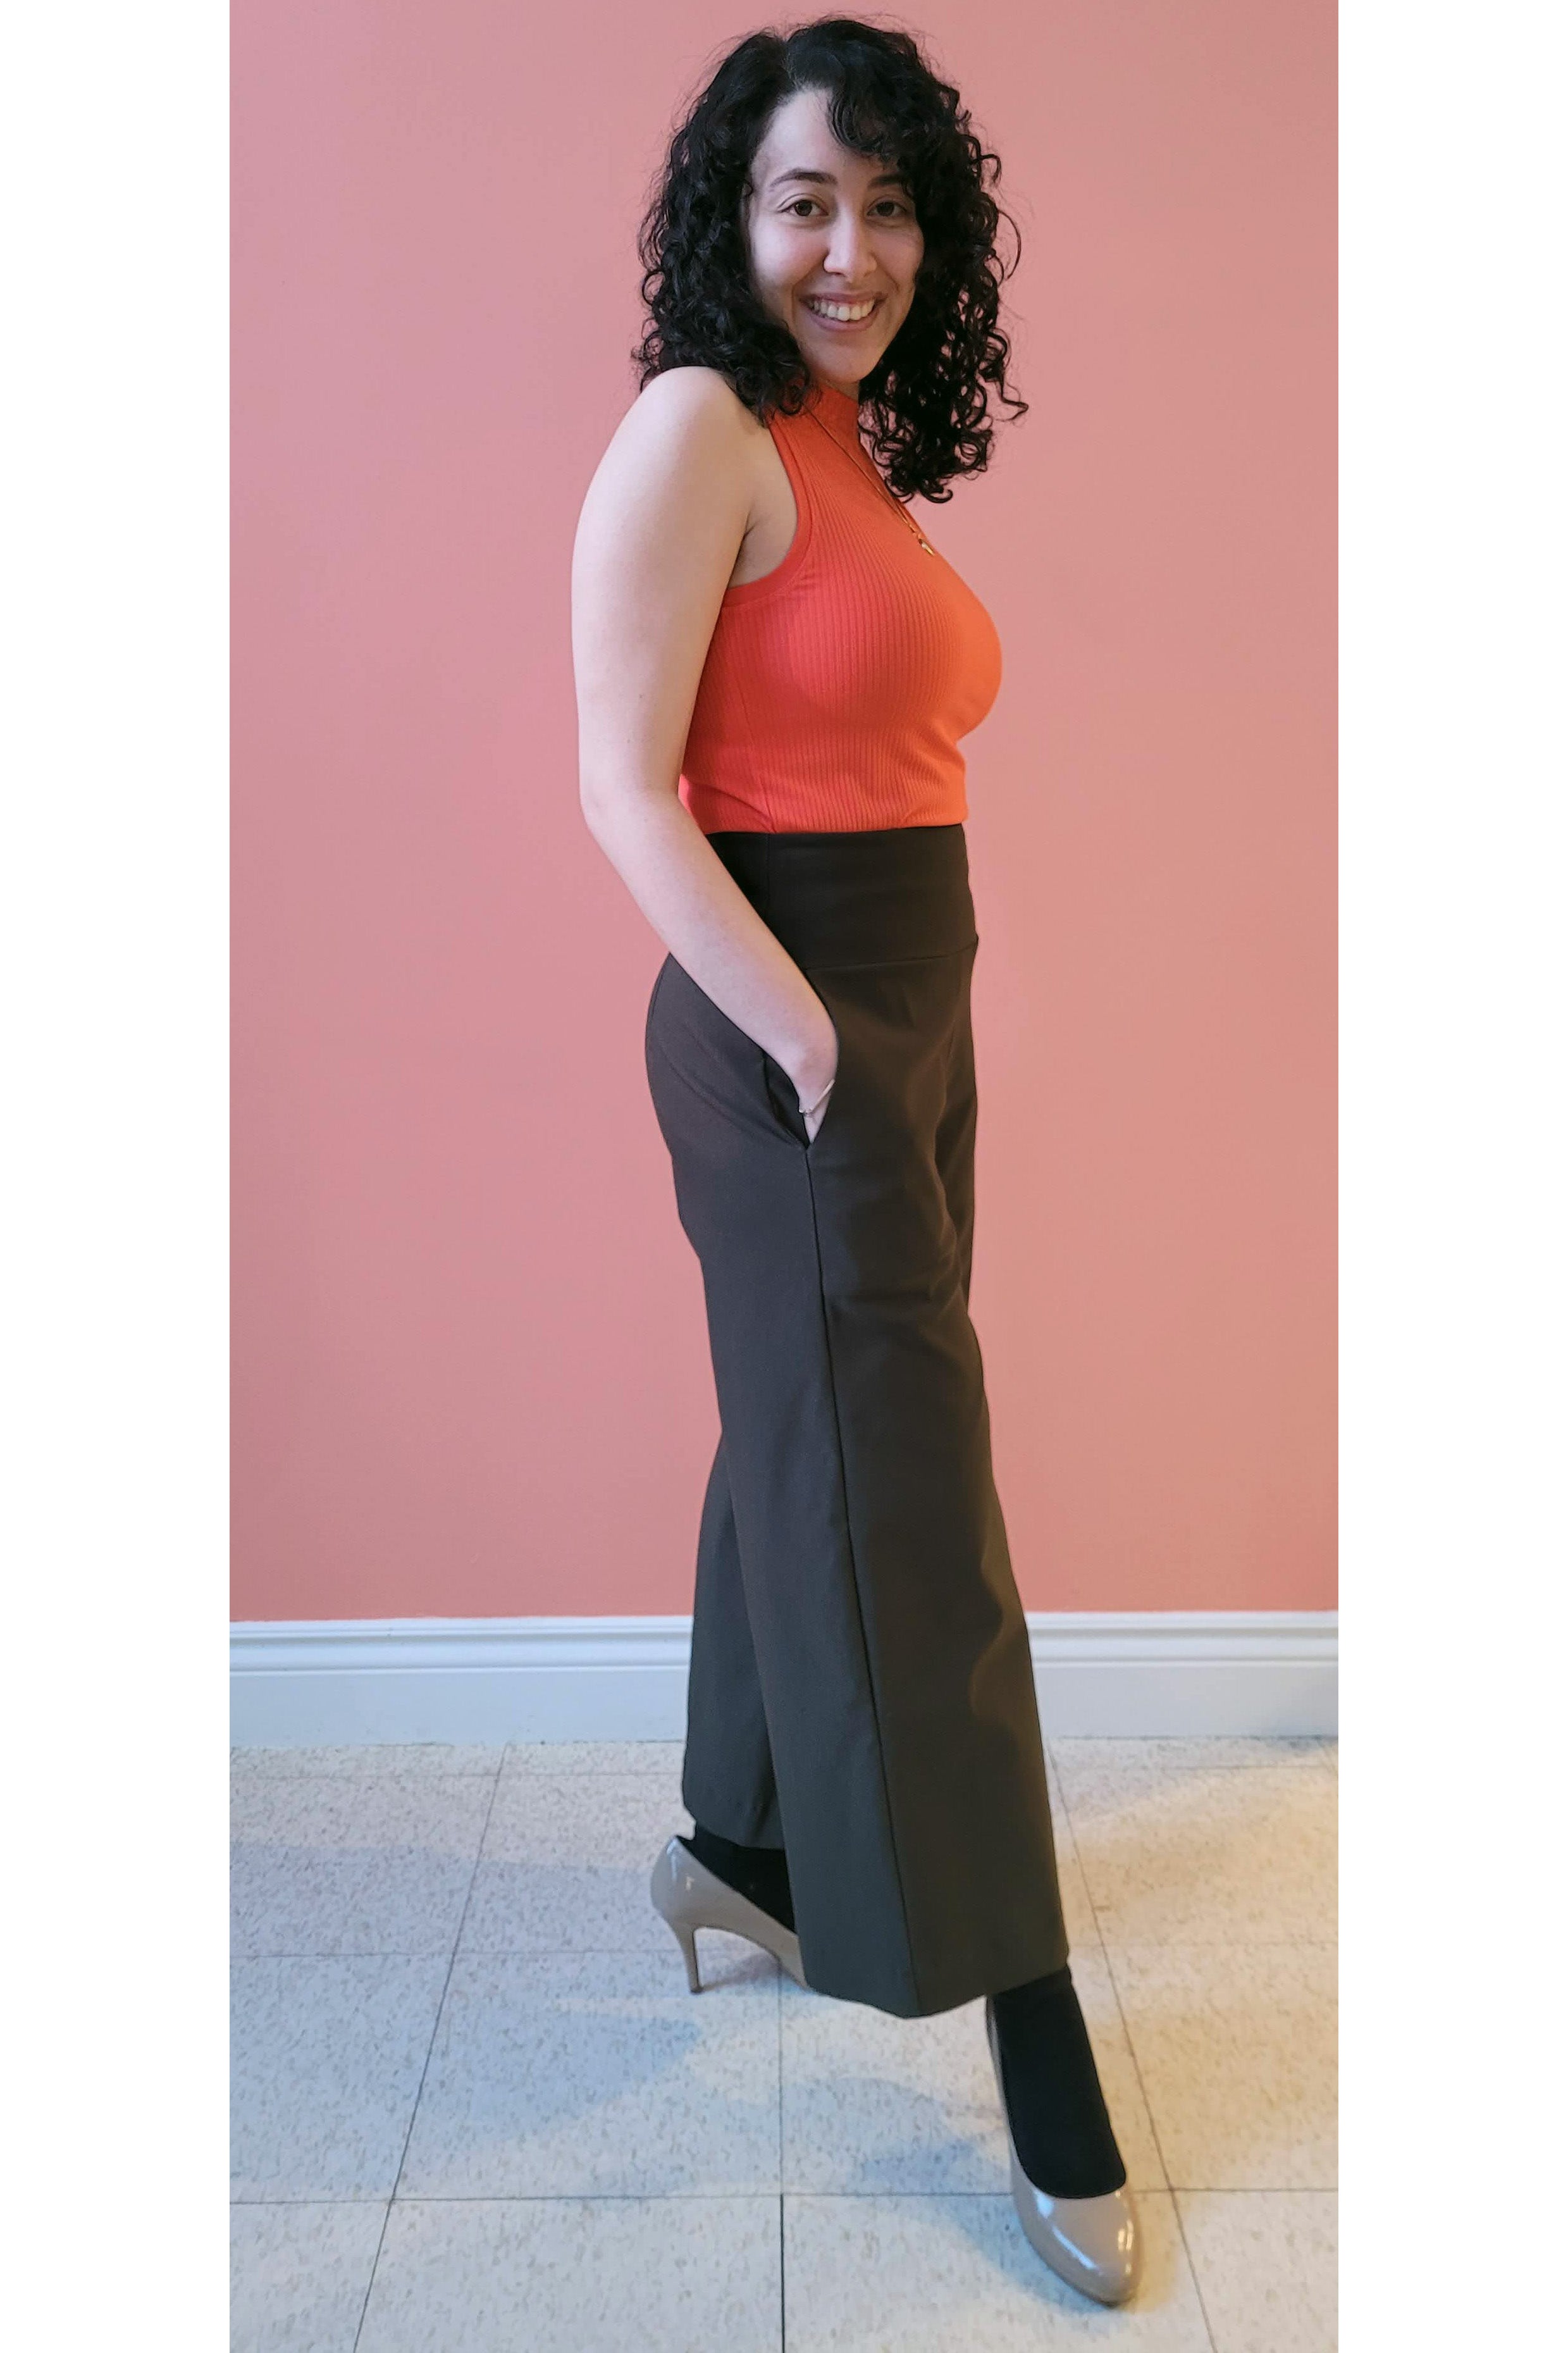 Ima Top by Melow, Coral, sleeveless, fitted, rib knit, slightly cropped length, bamboo rayon, eco fabric, OEKO-TEX certified ,sizes XS to XXL, made in Montreal